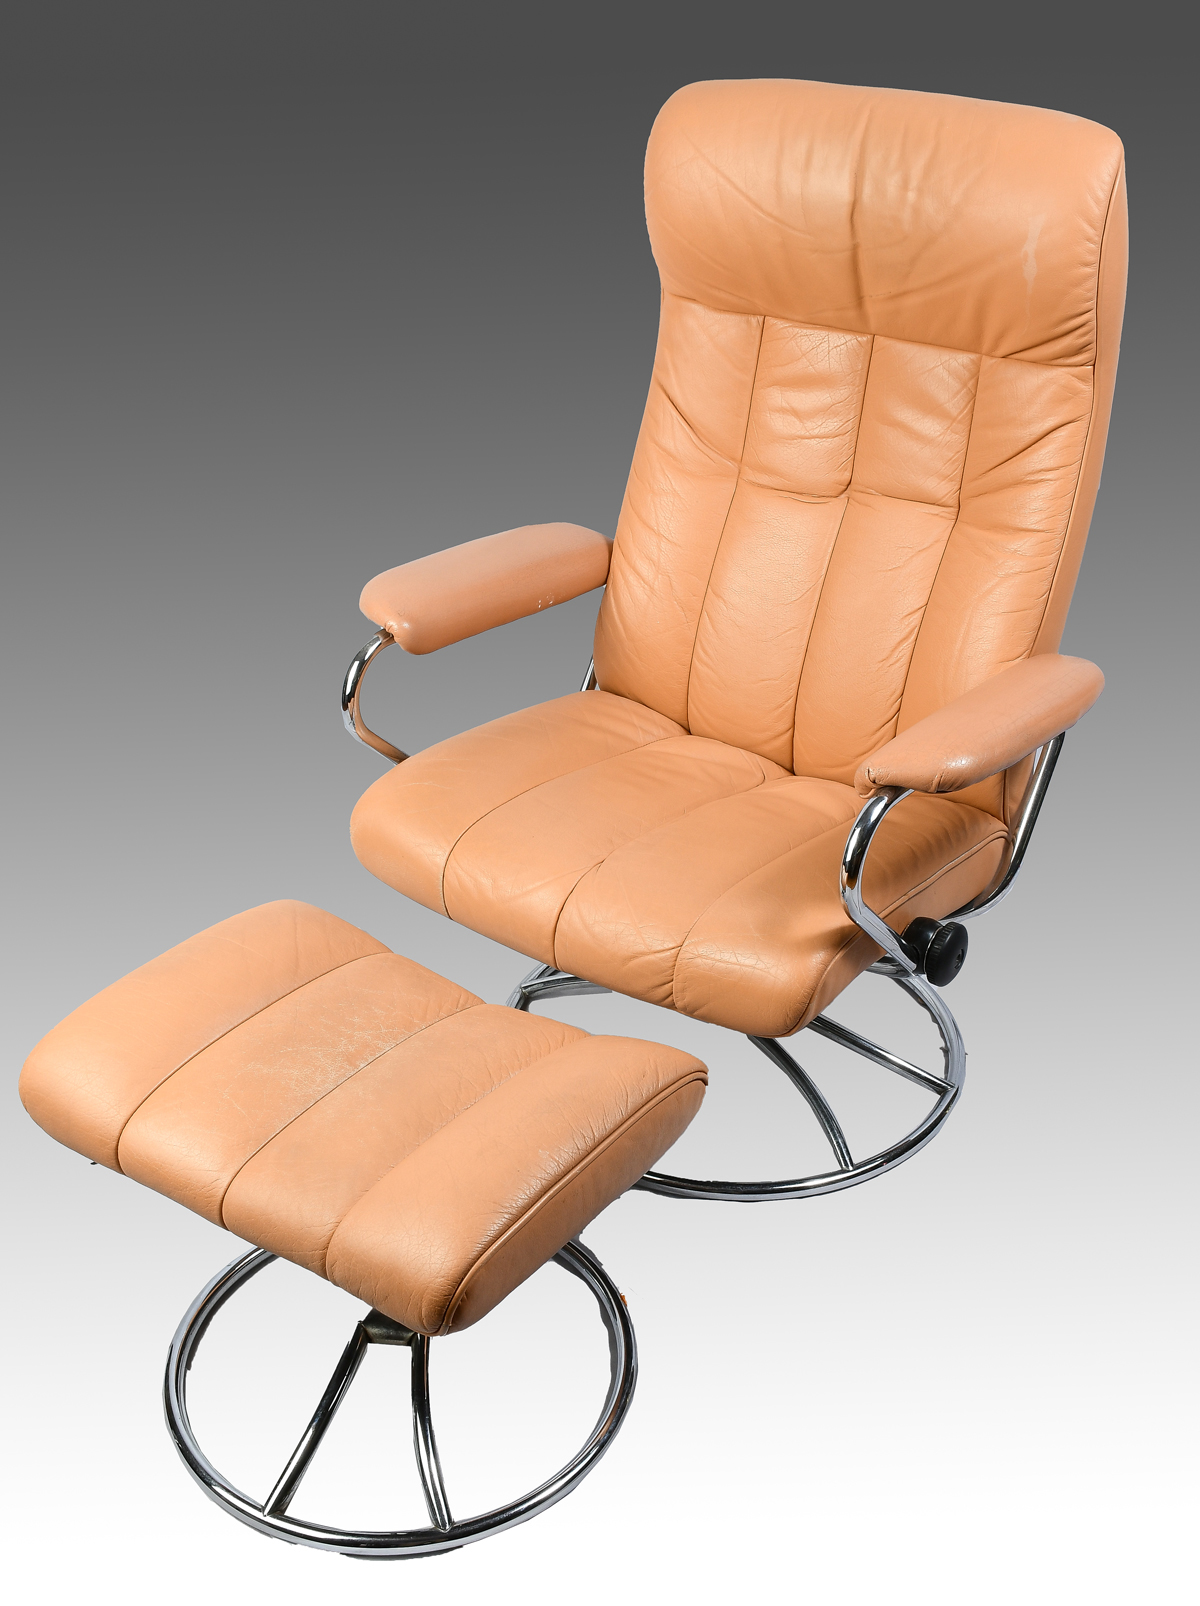 LEATHER CHAIR AND OTTOMAN Stressless 36b776